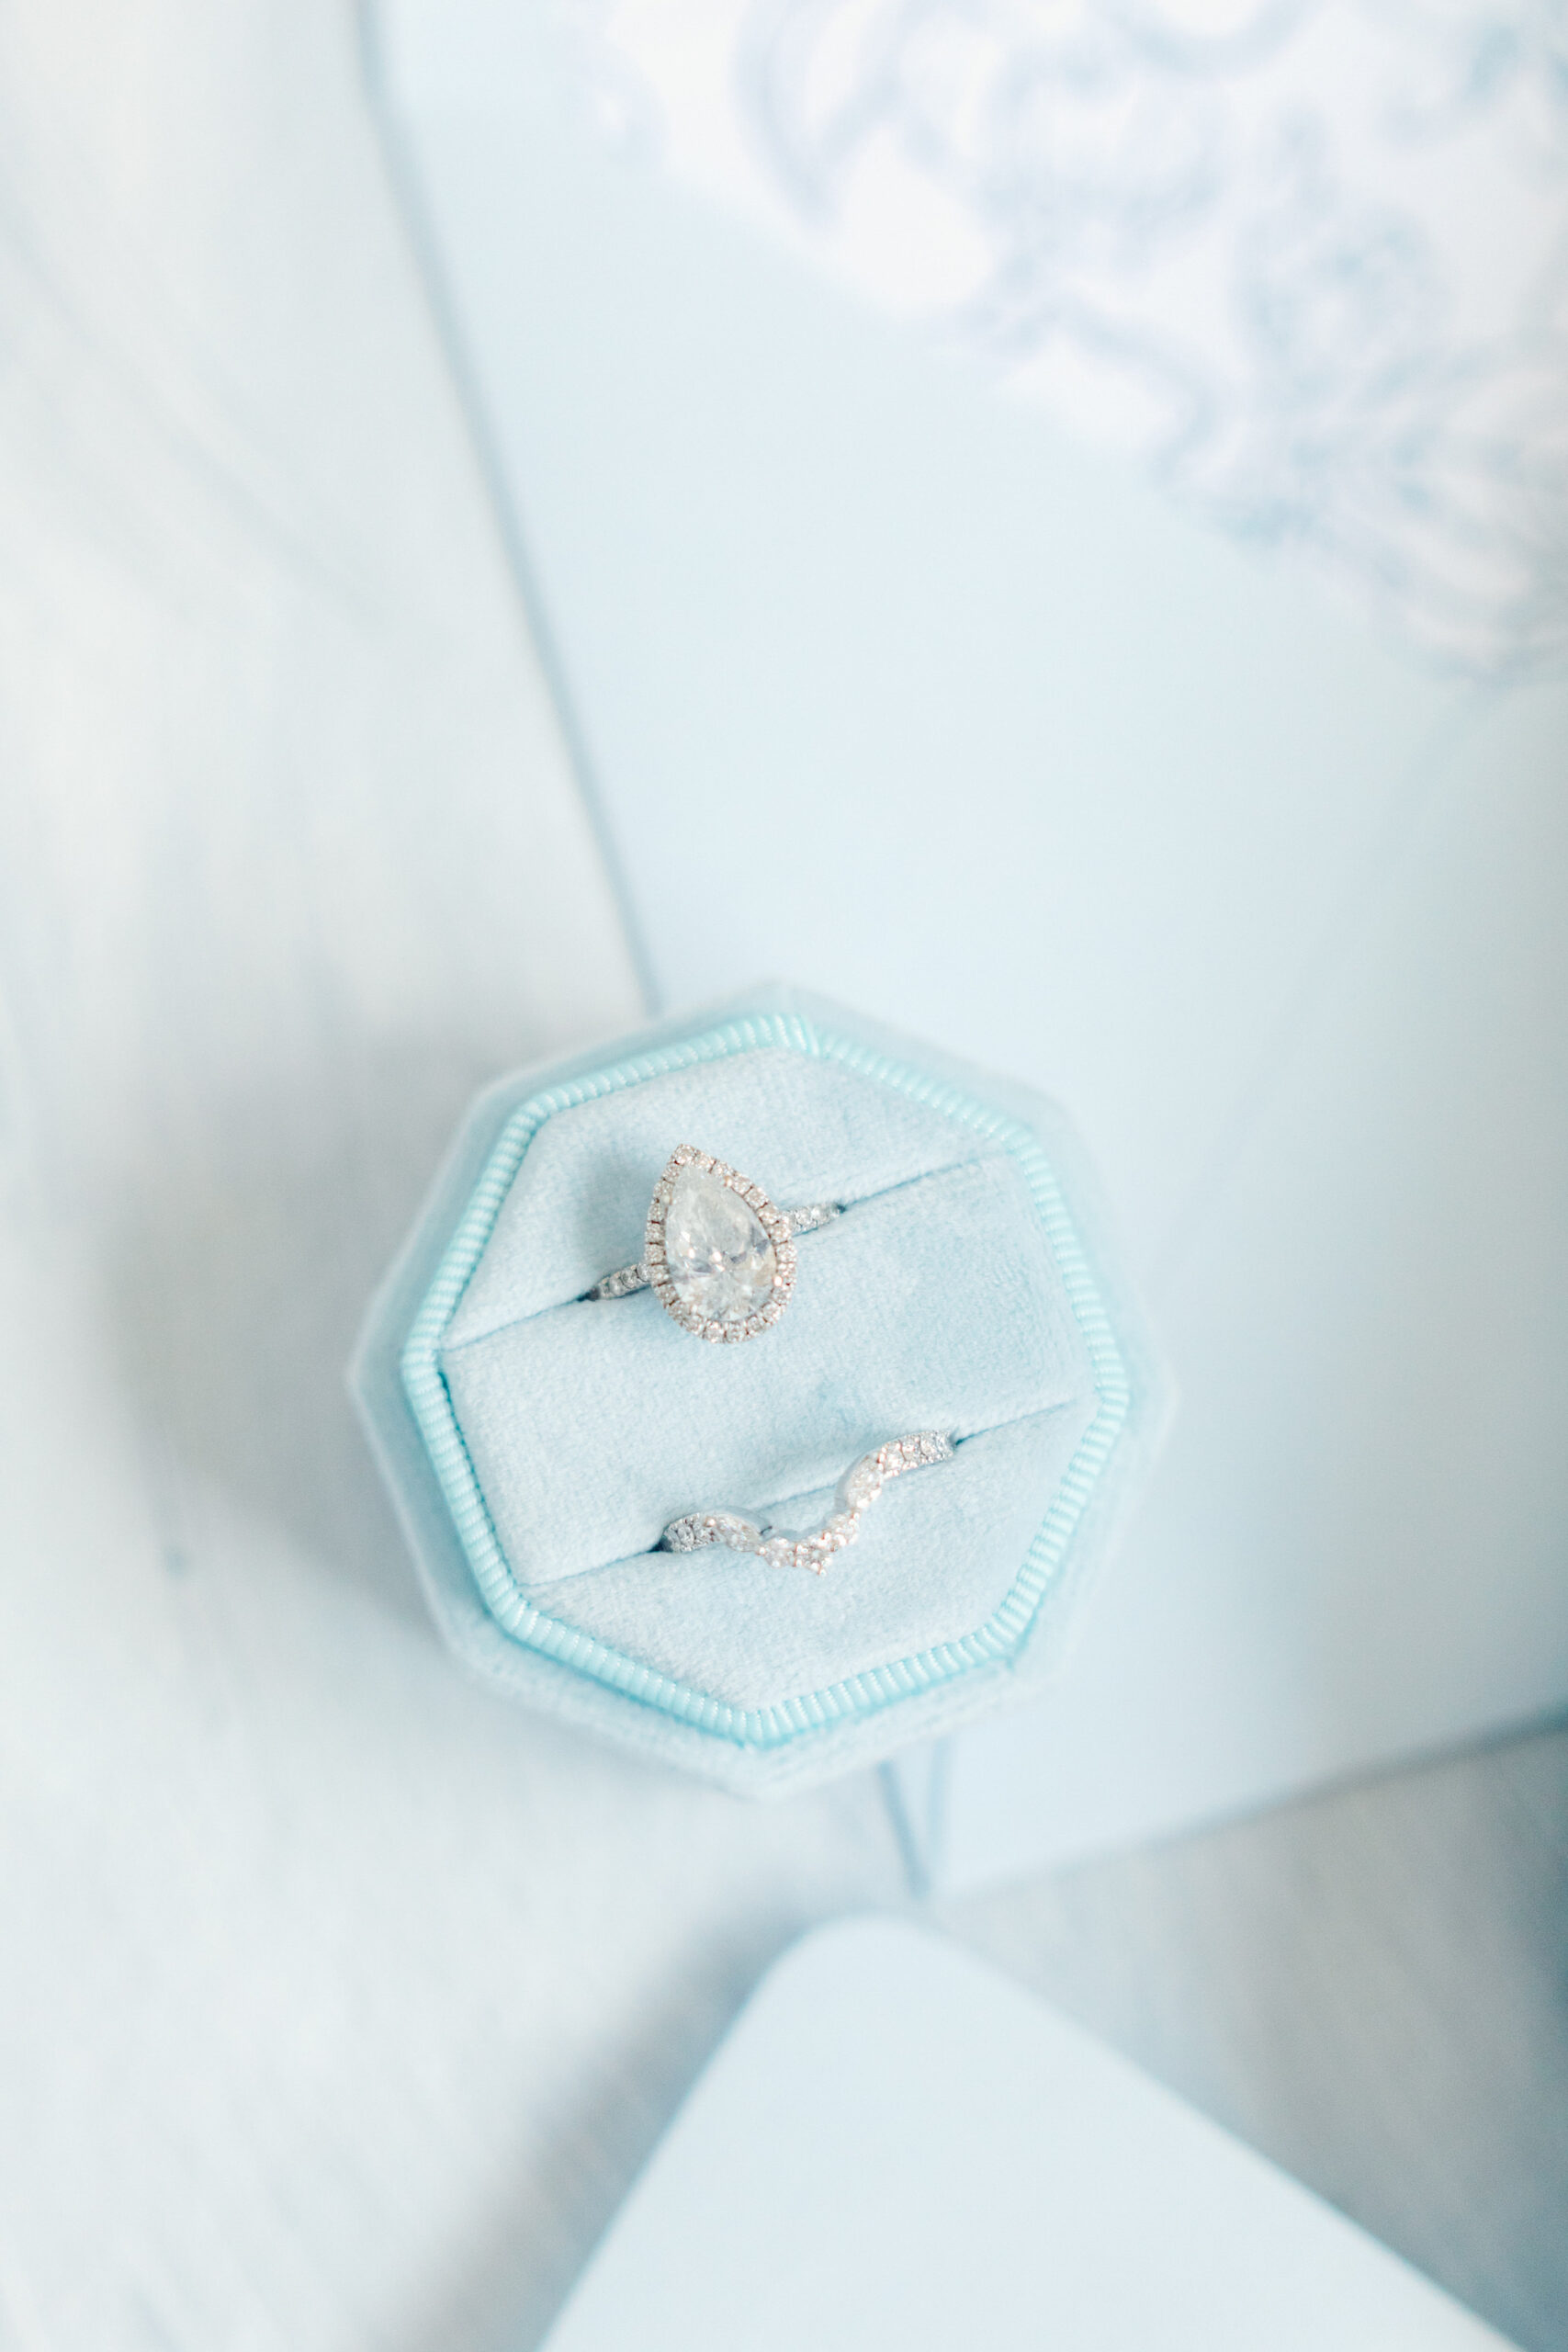 Romanic Pastel Light Dusty Blue Engagement and Wedding Ring Box | Pear Cut Engagement Ring with Halo